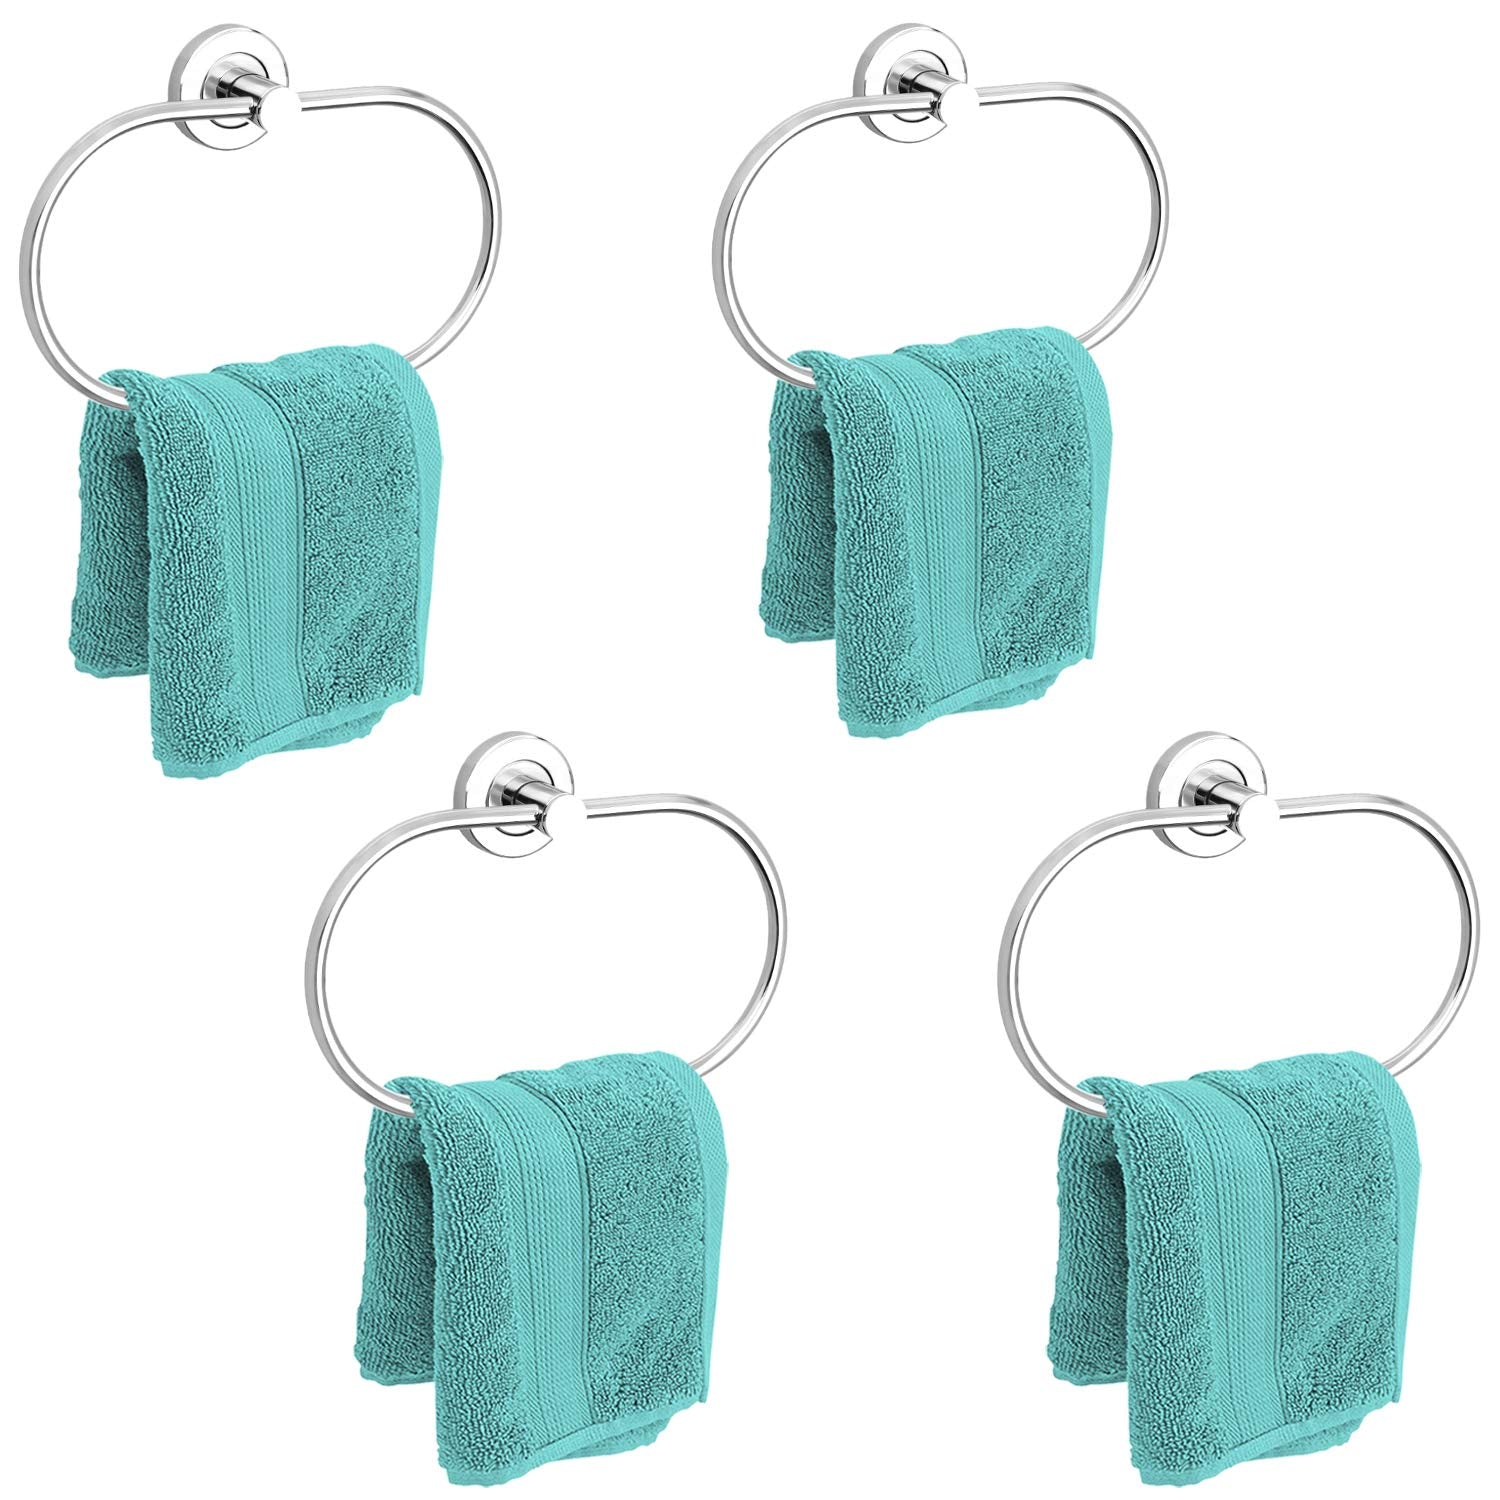 Plantex Stainless Steel Towel Ring for Bathroom/Wash Basin/Napkin-Towel Hanger/Bathroom Accessories (Chrome-Oval) - Pack of 1